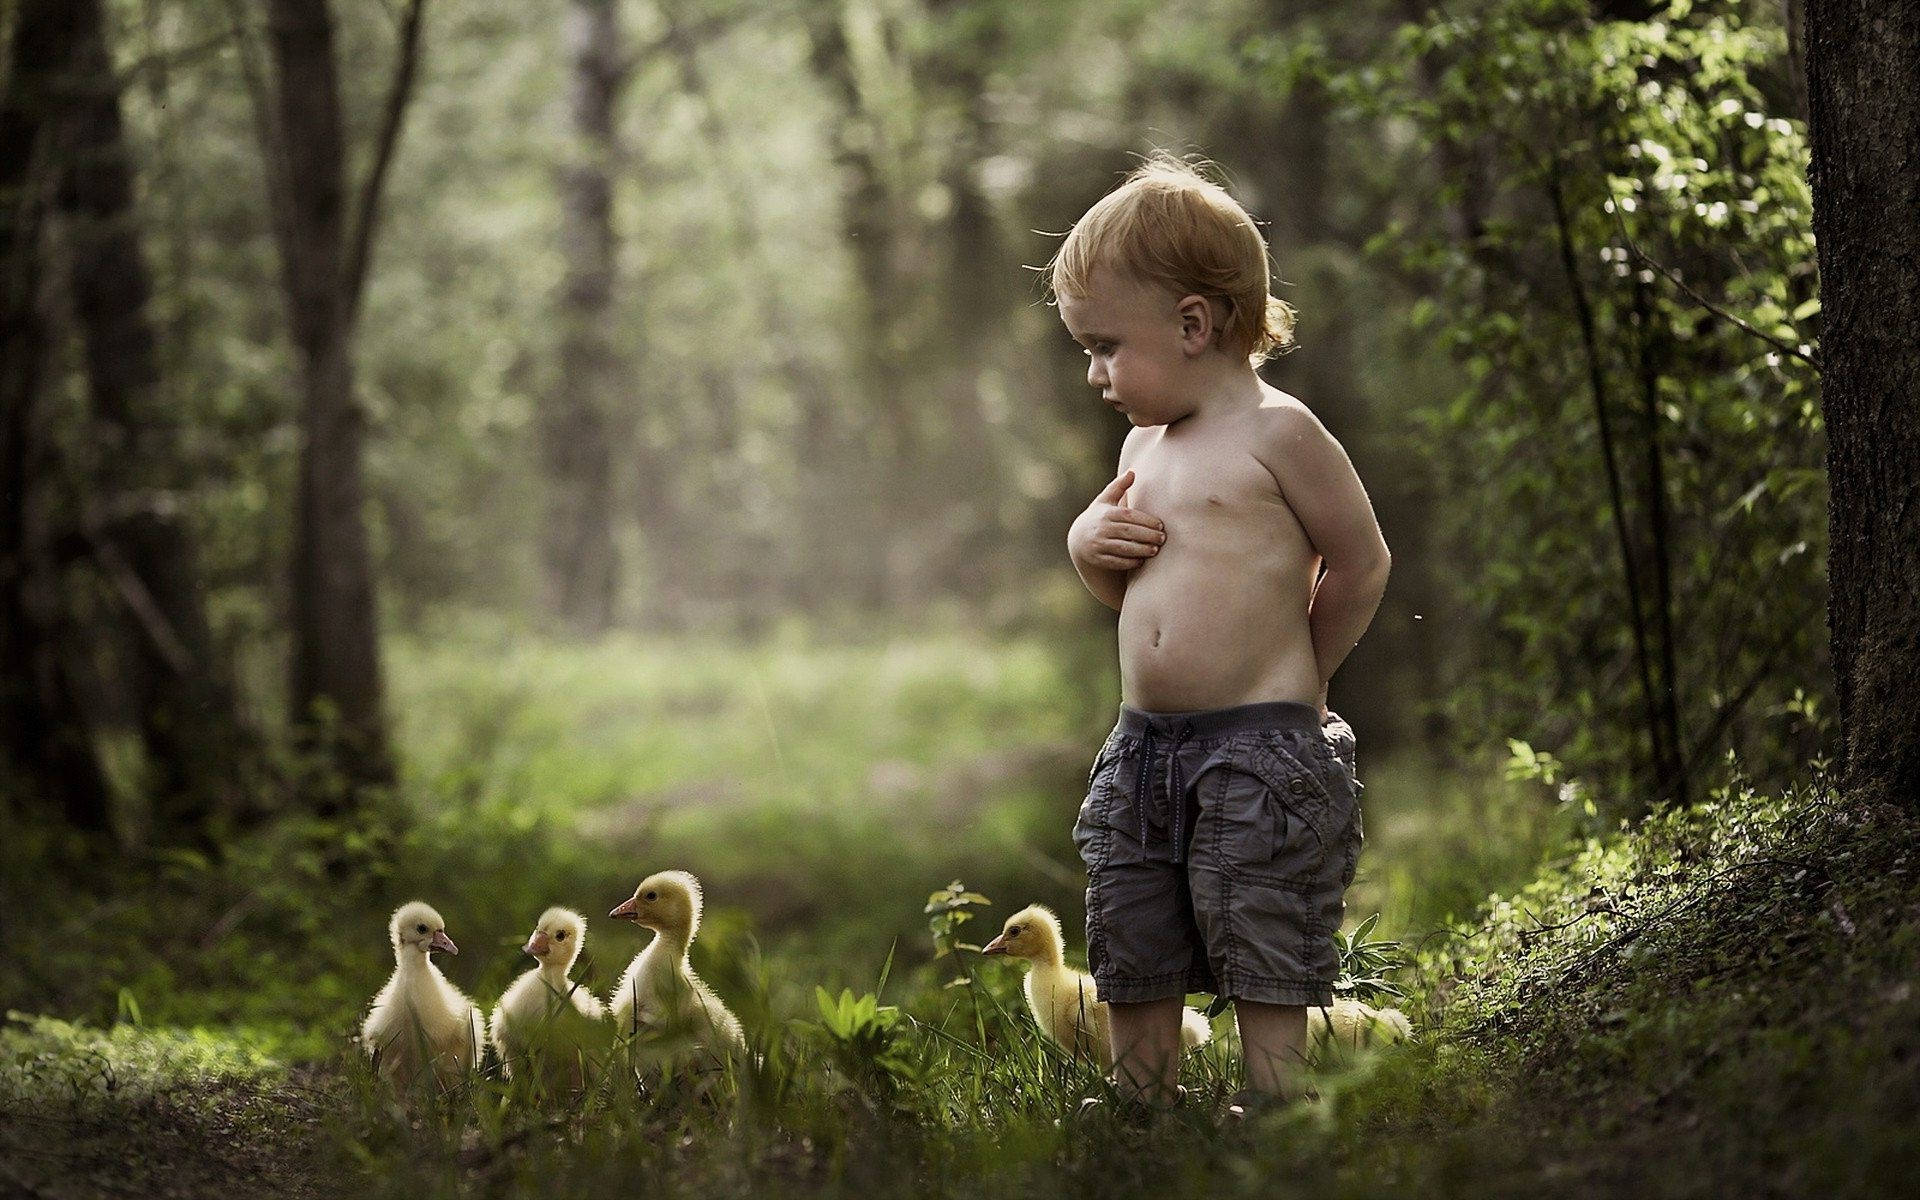 Baby Boy With Ducklings Background